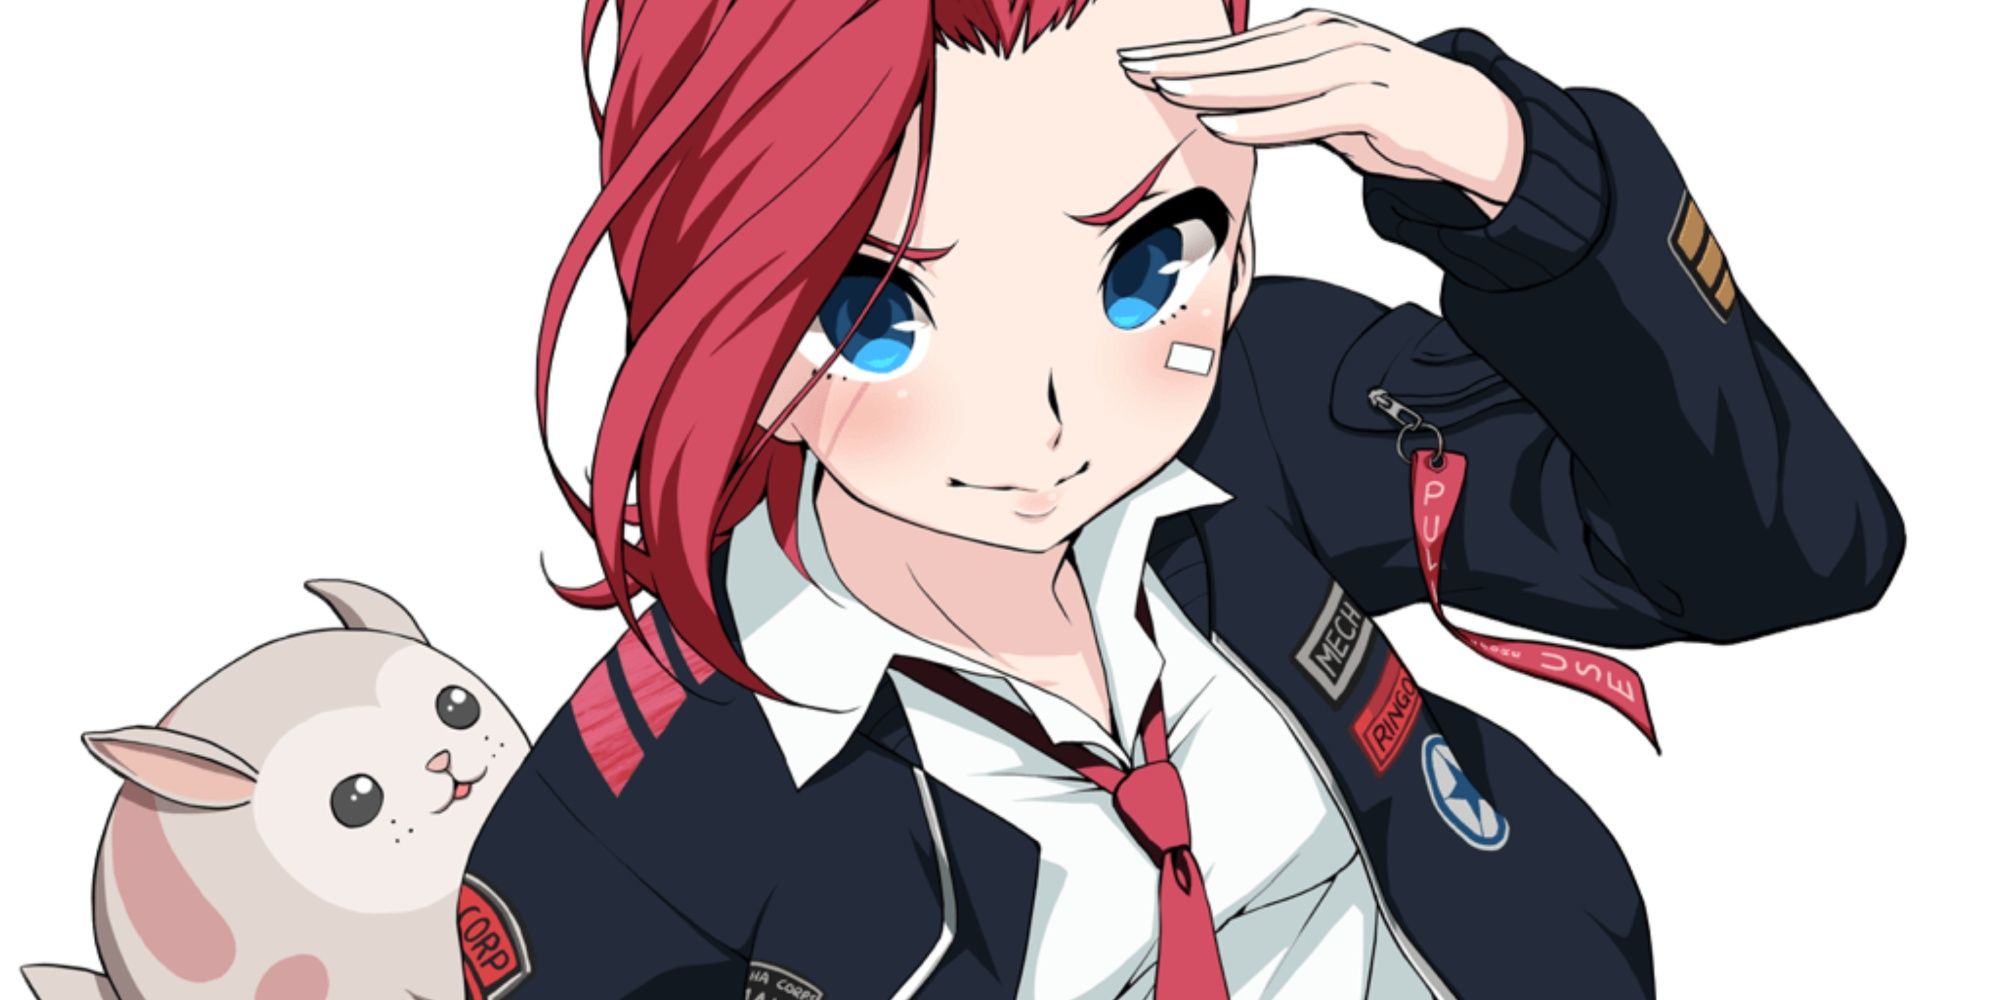 offical anime NYC mascot alice promo art from website